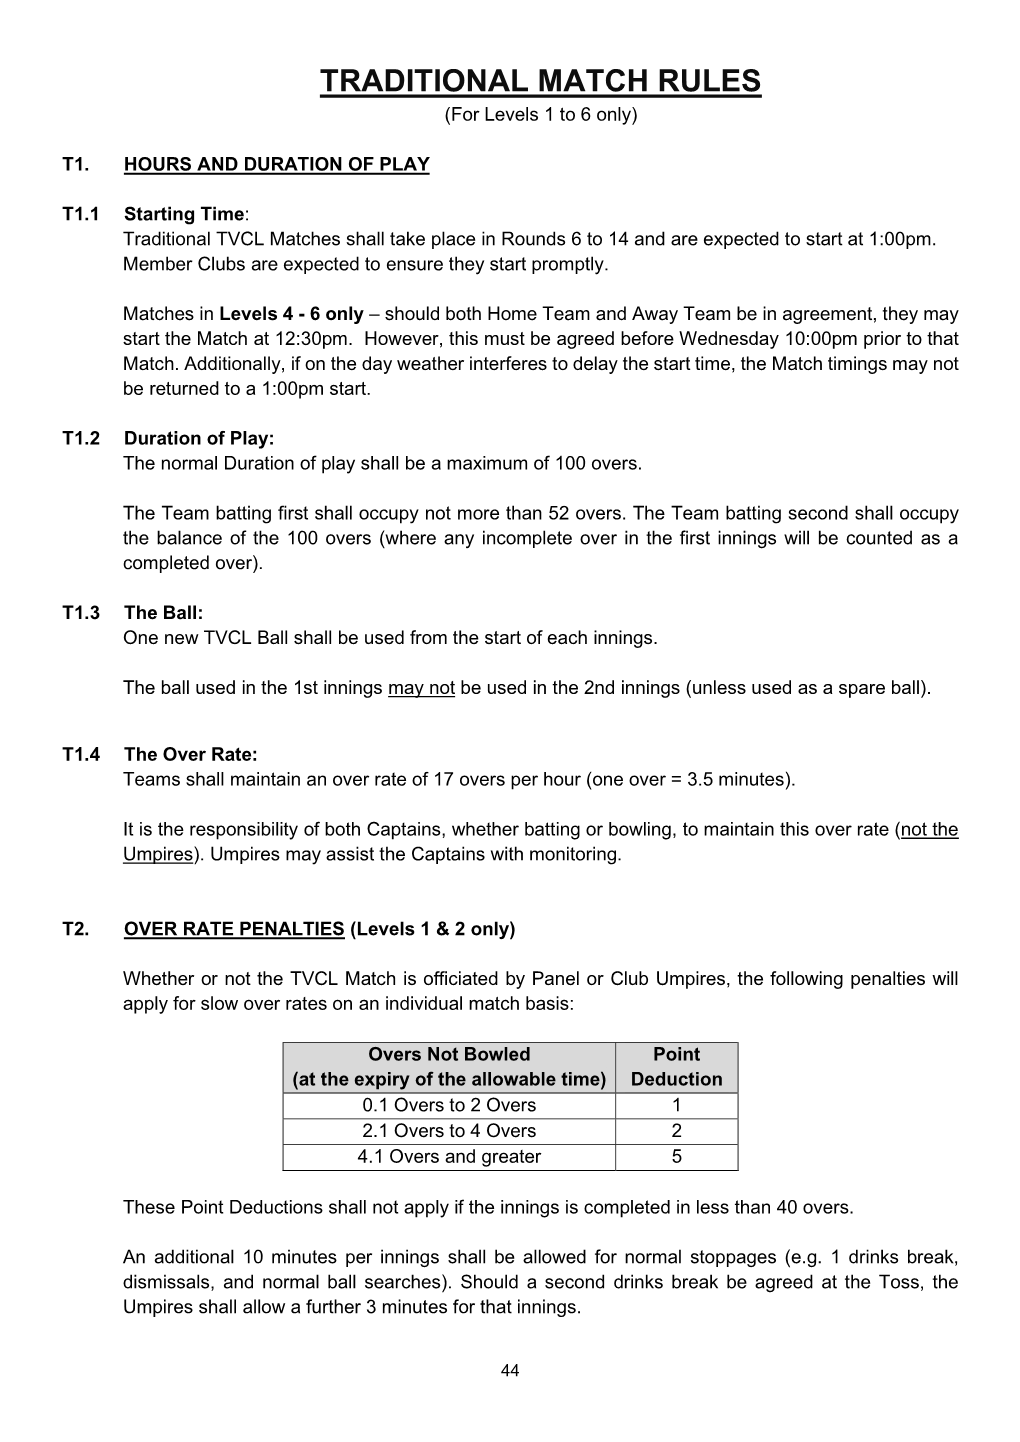 TRADITIONAL MATCH RULES (For Levels 1 to 6 Only)